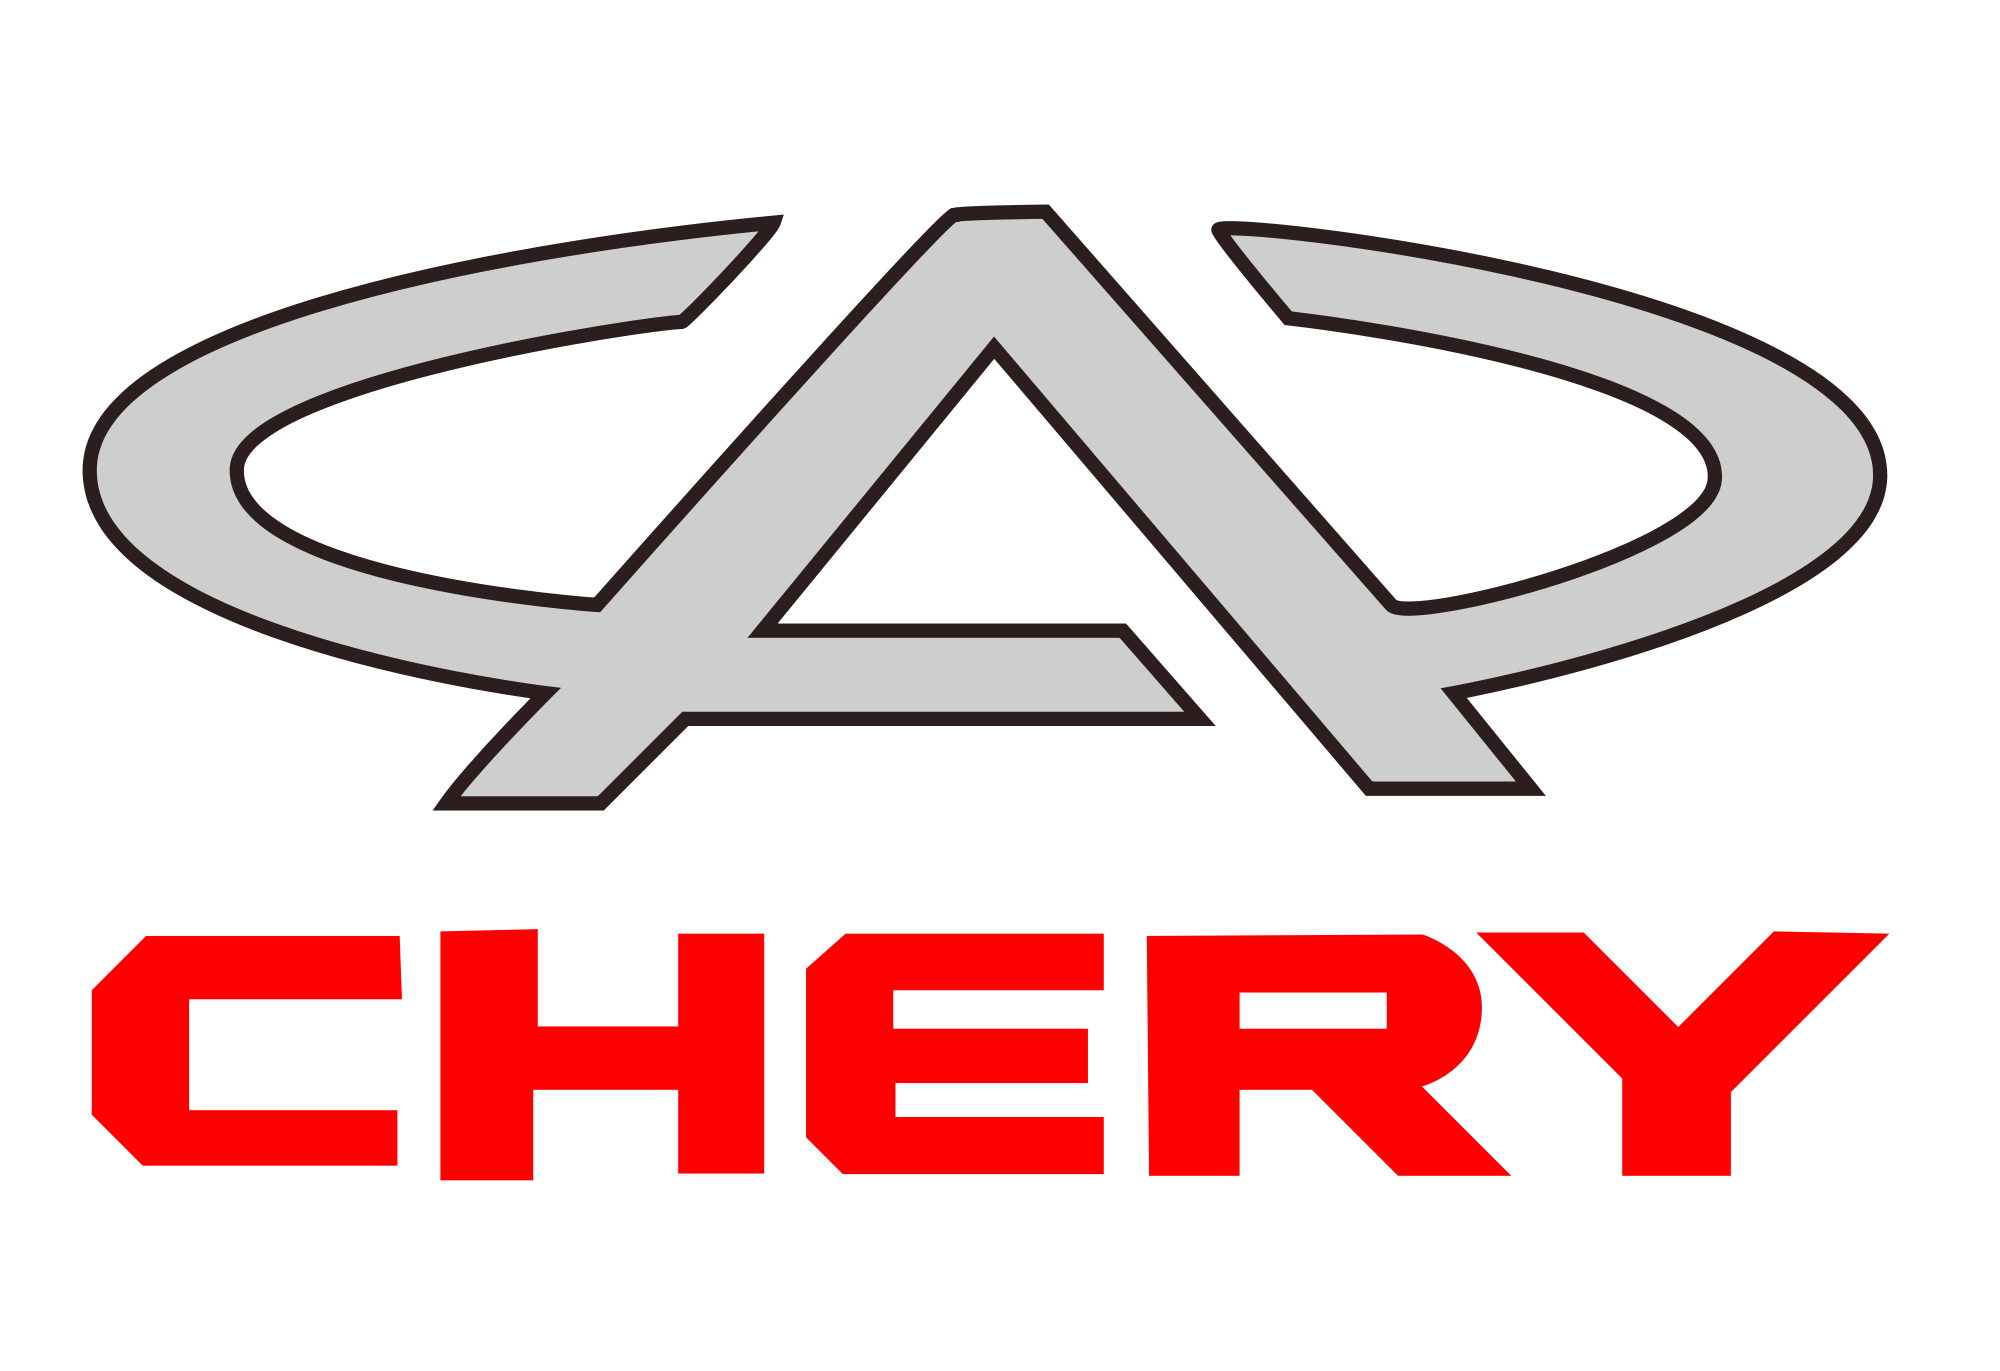 Chery Logo - Chinese Car Brands, Companies and Manufacturers | Car Brand Names.com